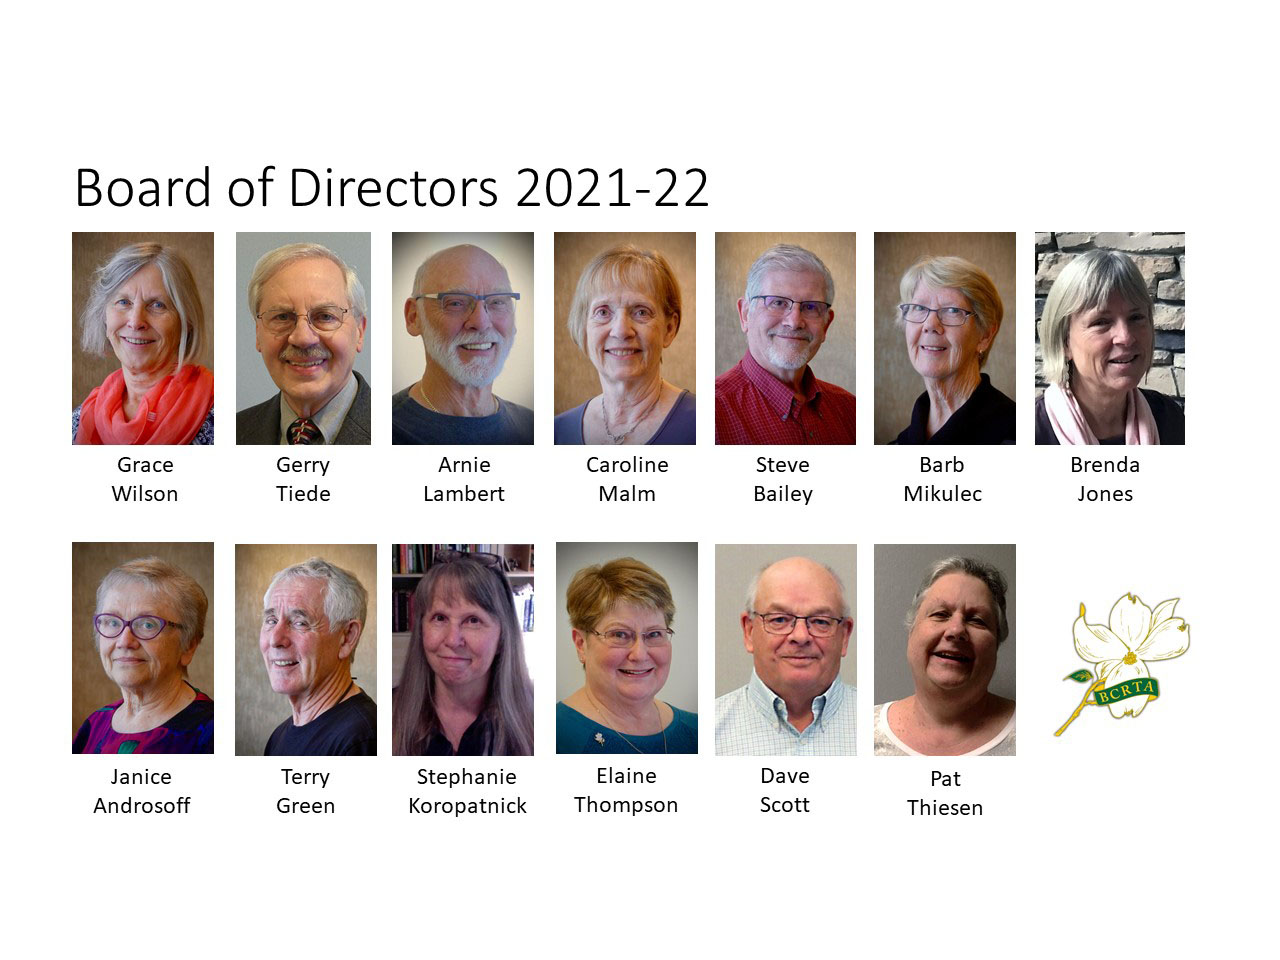 2021-2022 Board: Continuity and New Faces